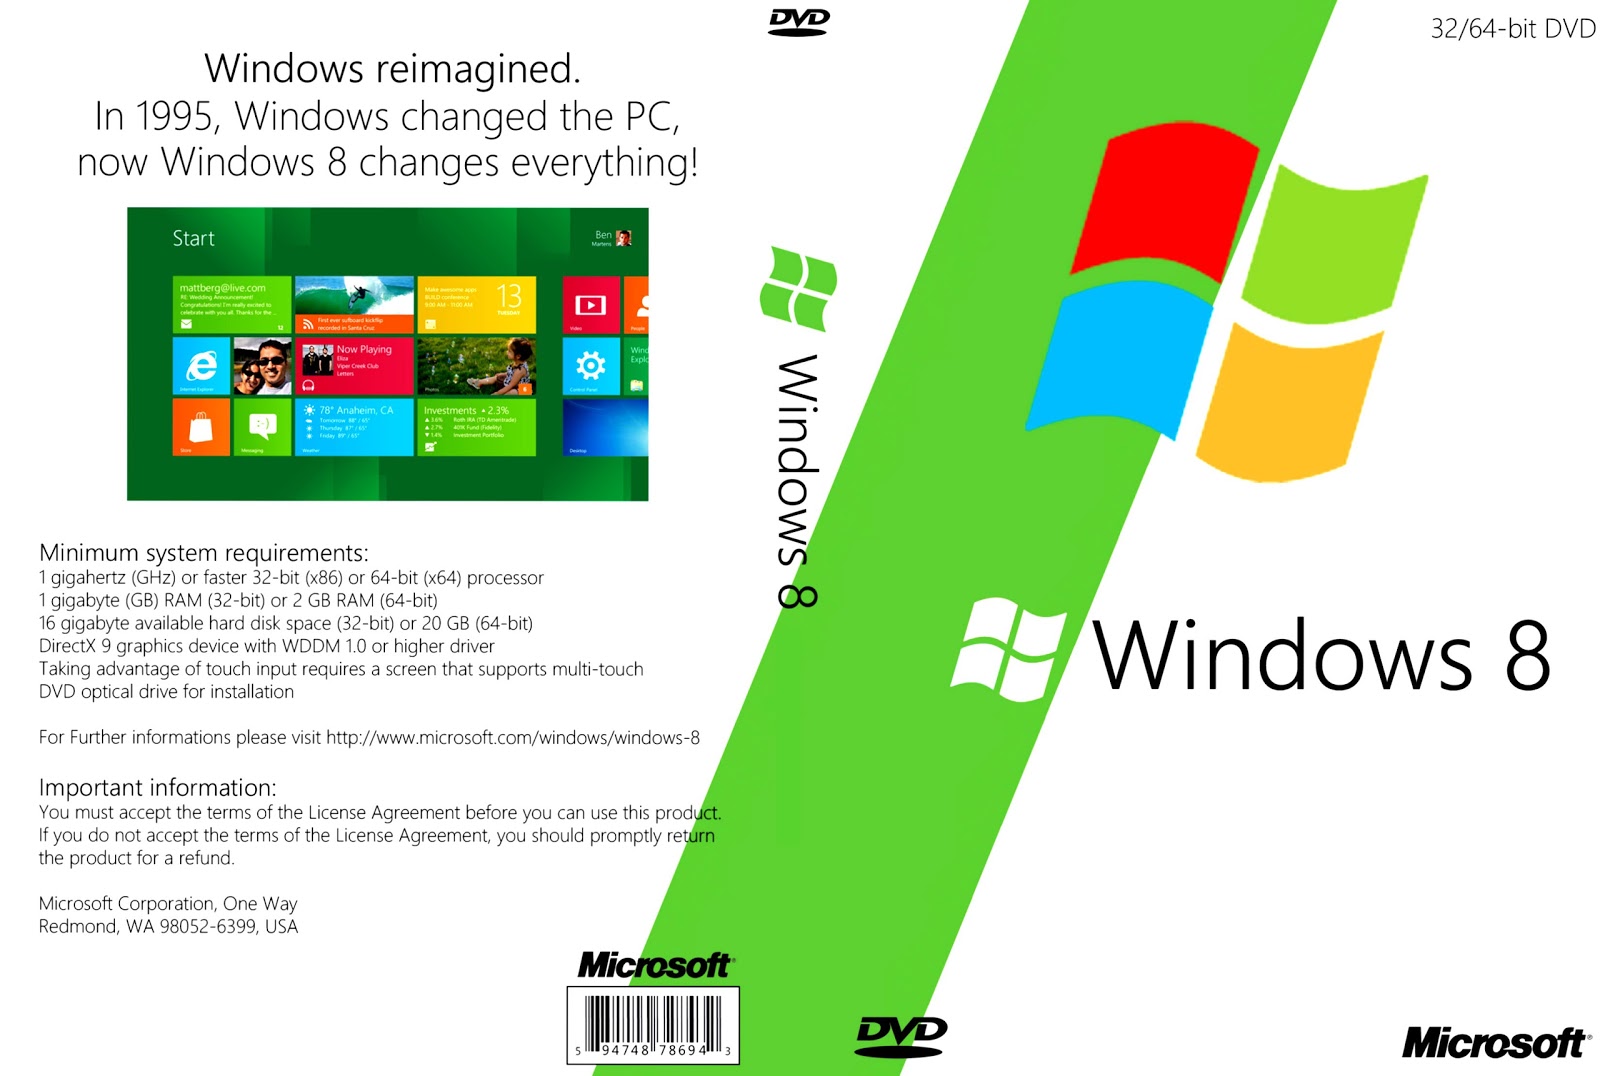 How To Activate Windows 8 Pro Build 9200 For Free - casinomake